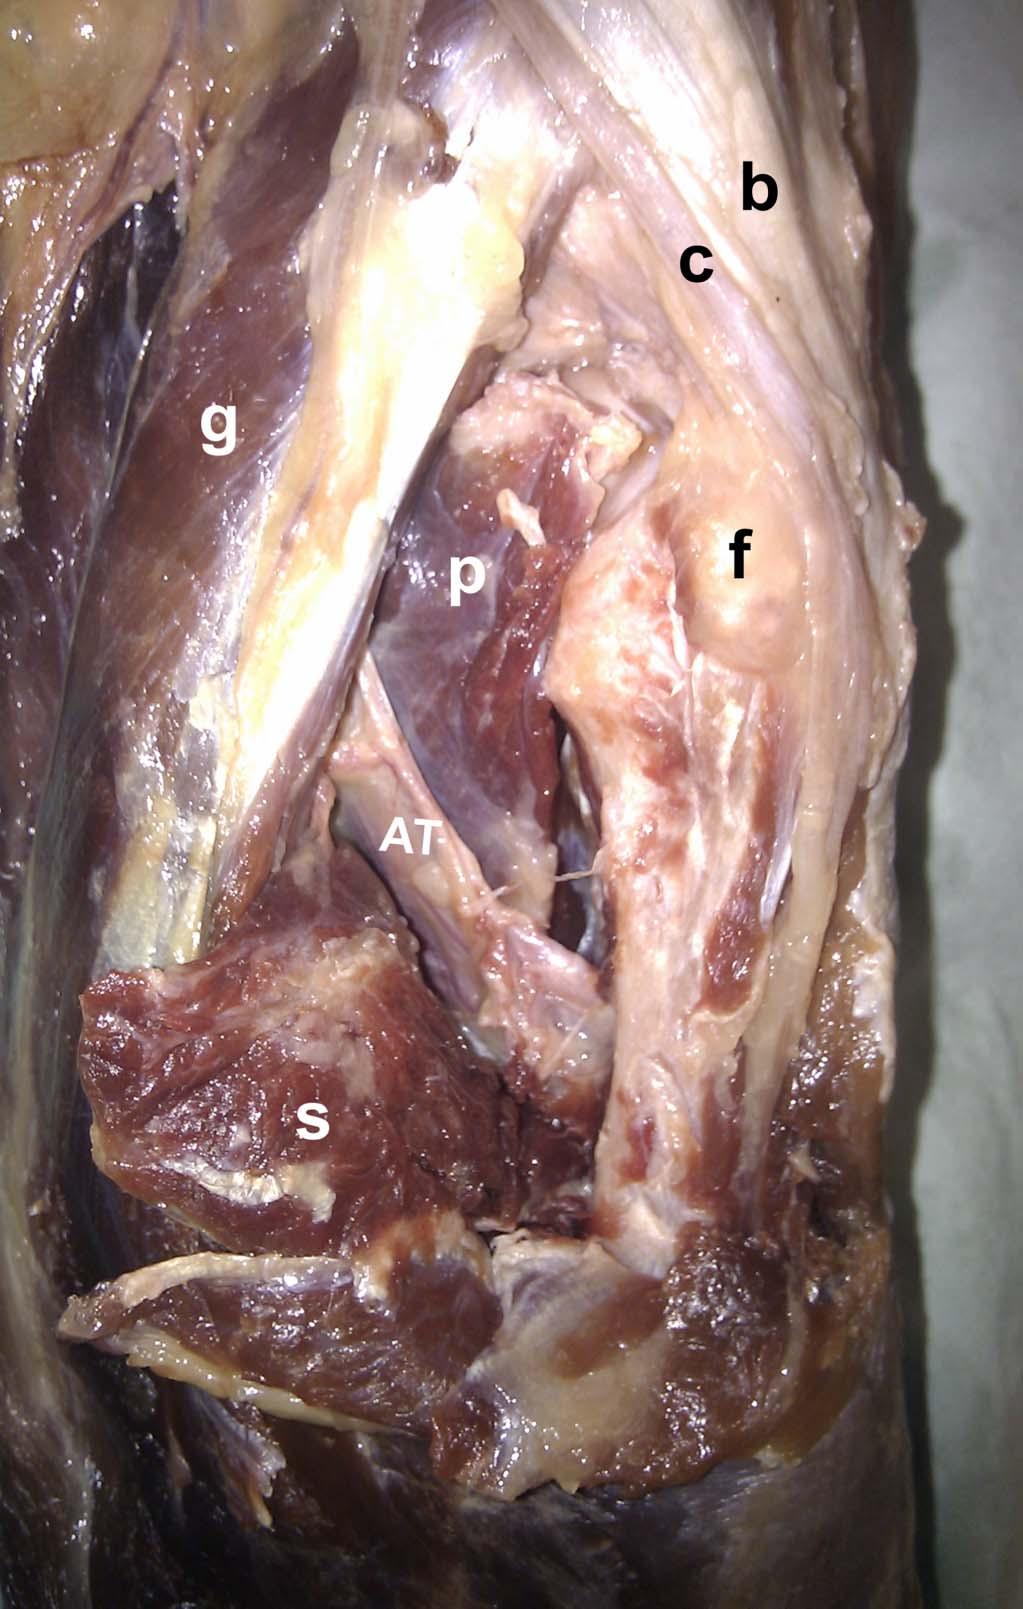 Heidari et al J Orthop Trauma Volume 27, Number 4, April 2013 FIGURE 5. The soleus muscle (s) is released from its origin on the posterior aspect of the fibula (f) and retracted medially.